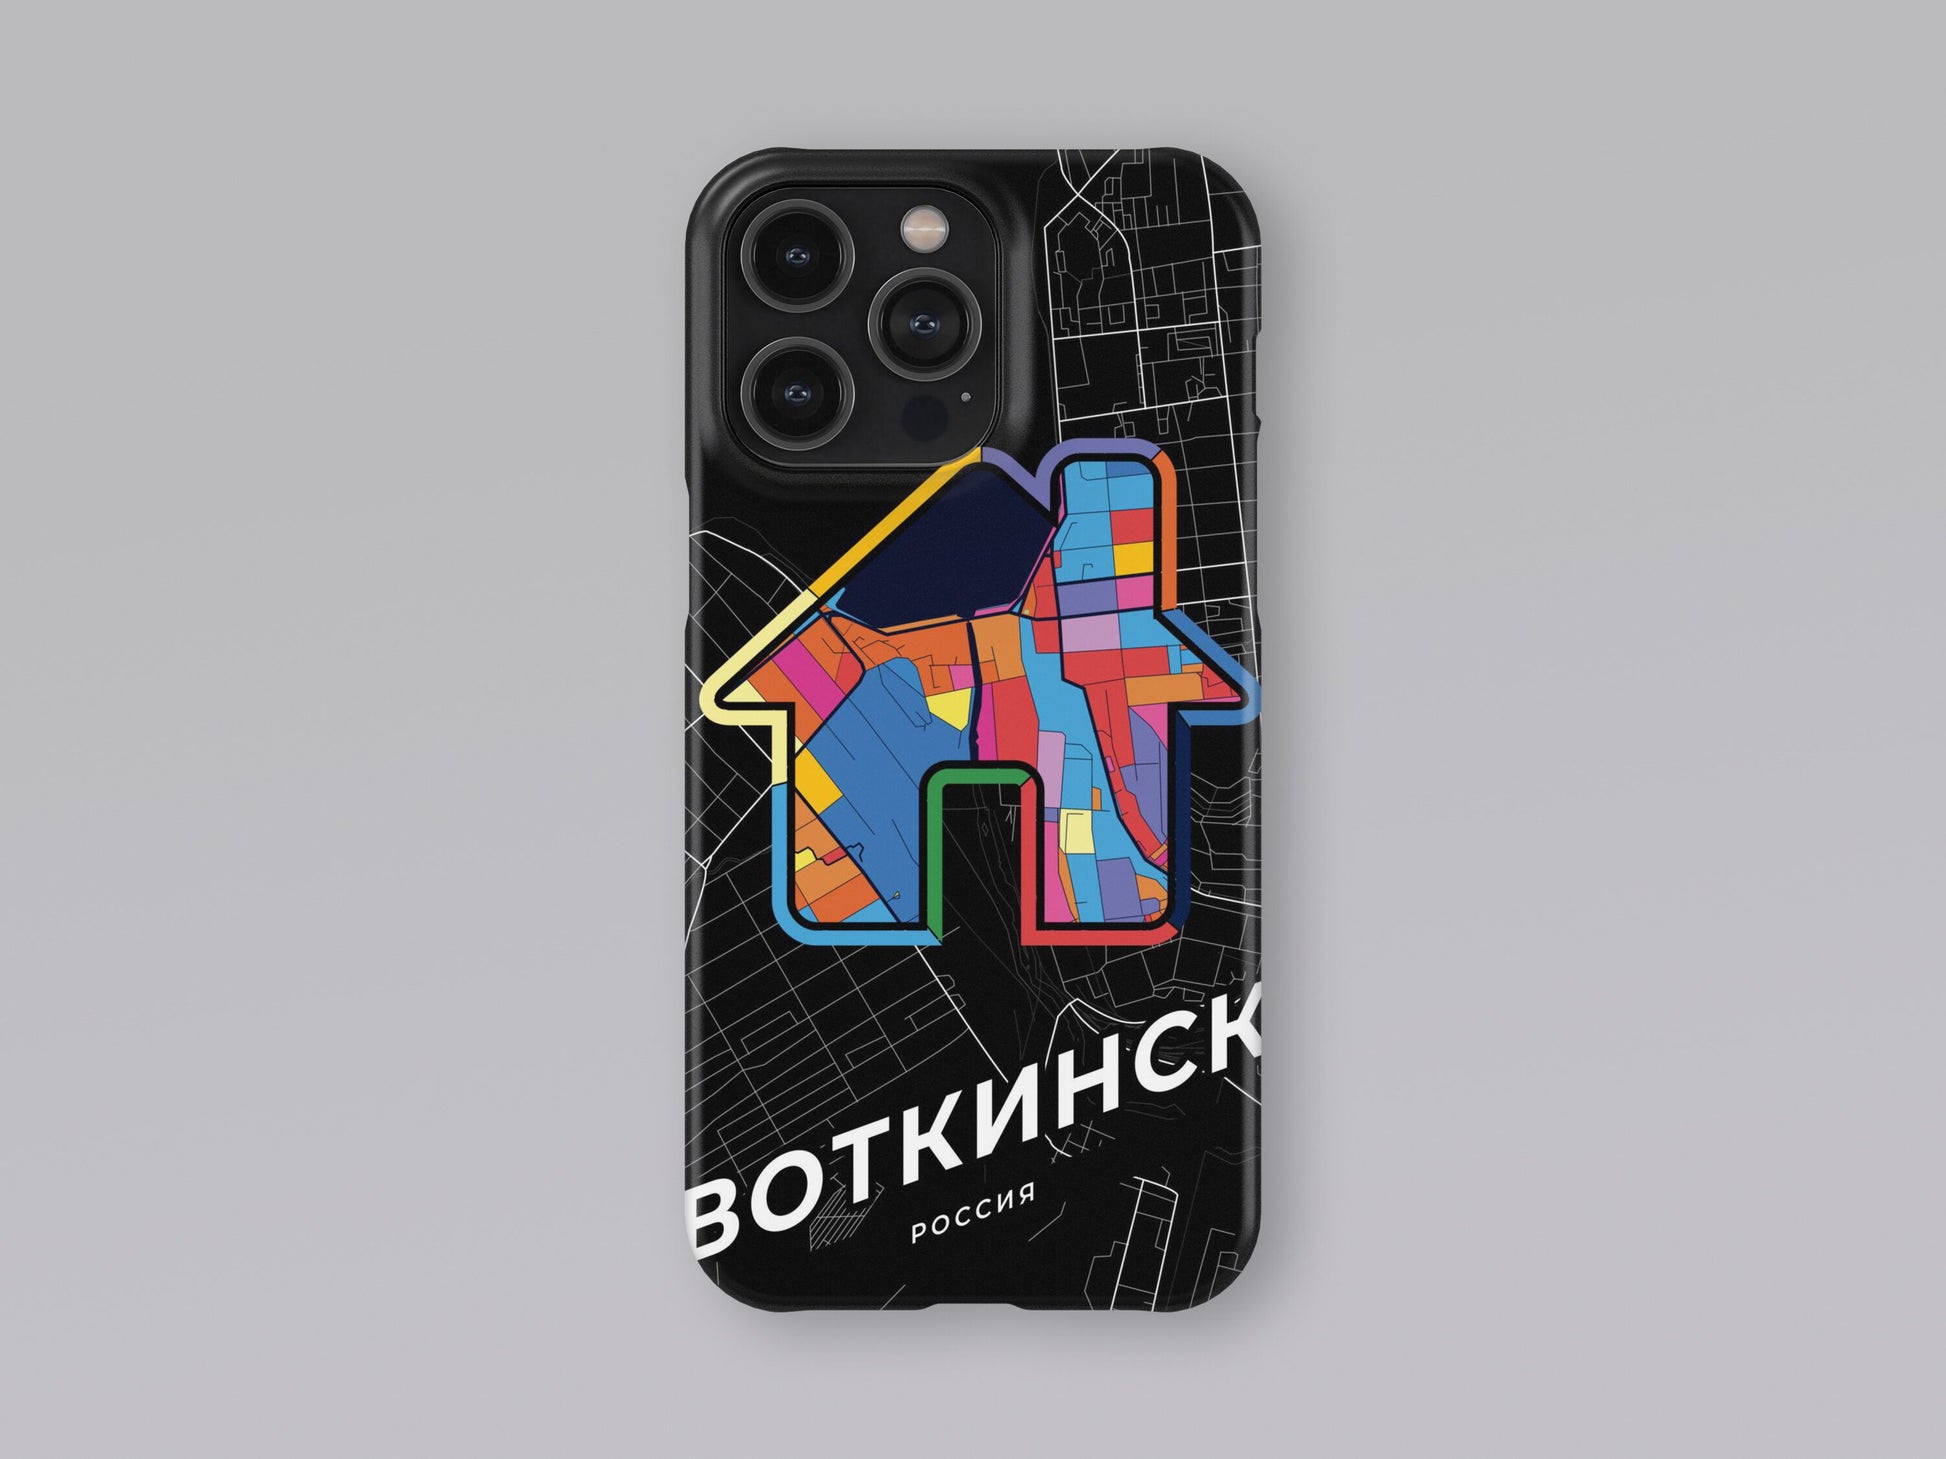 Votkinsk Russia slim phone case with colorful icon 3